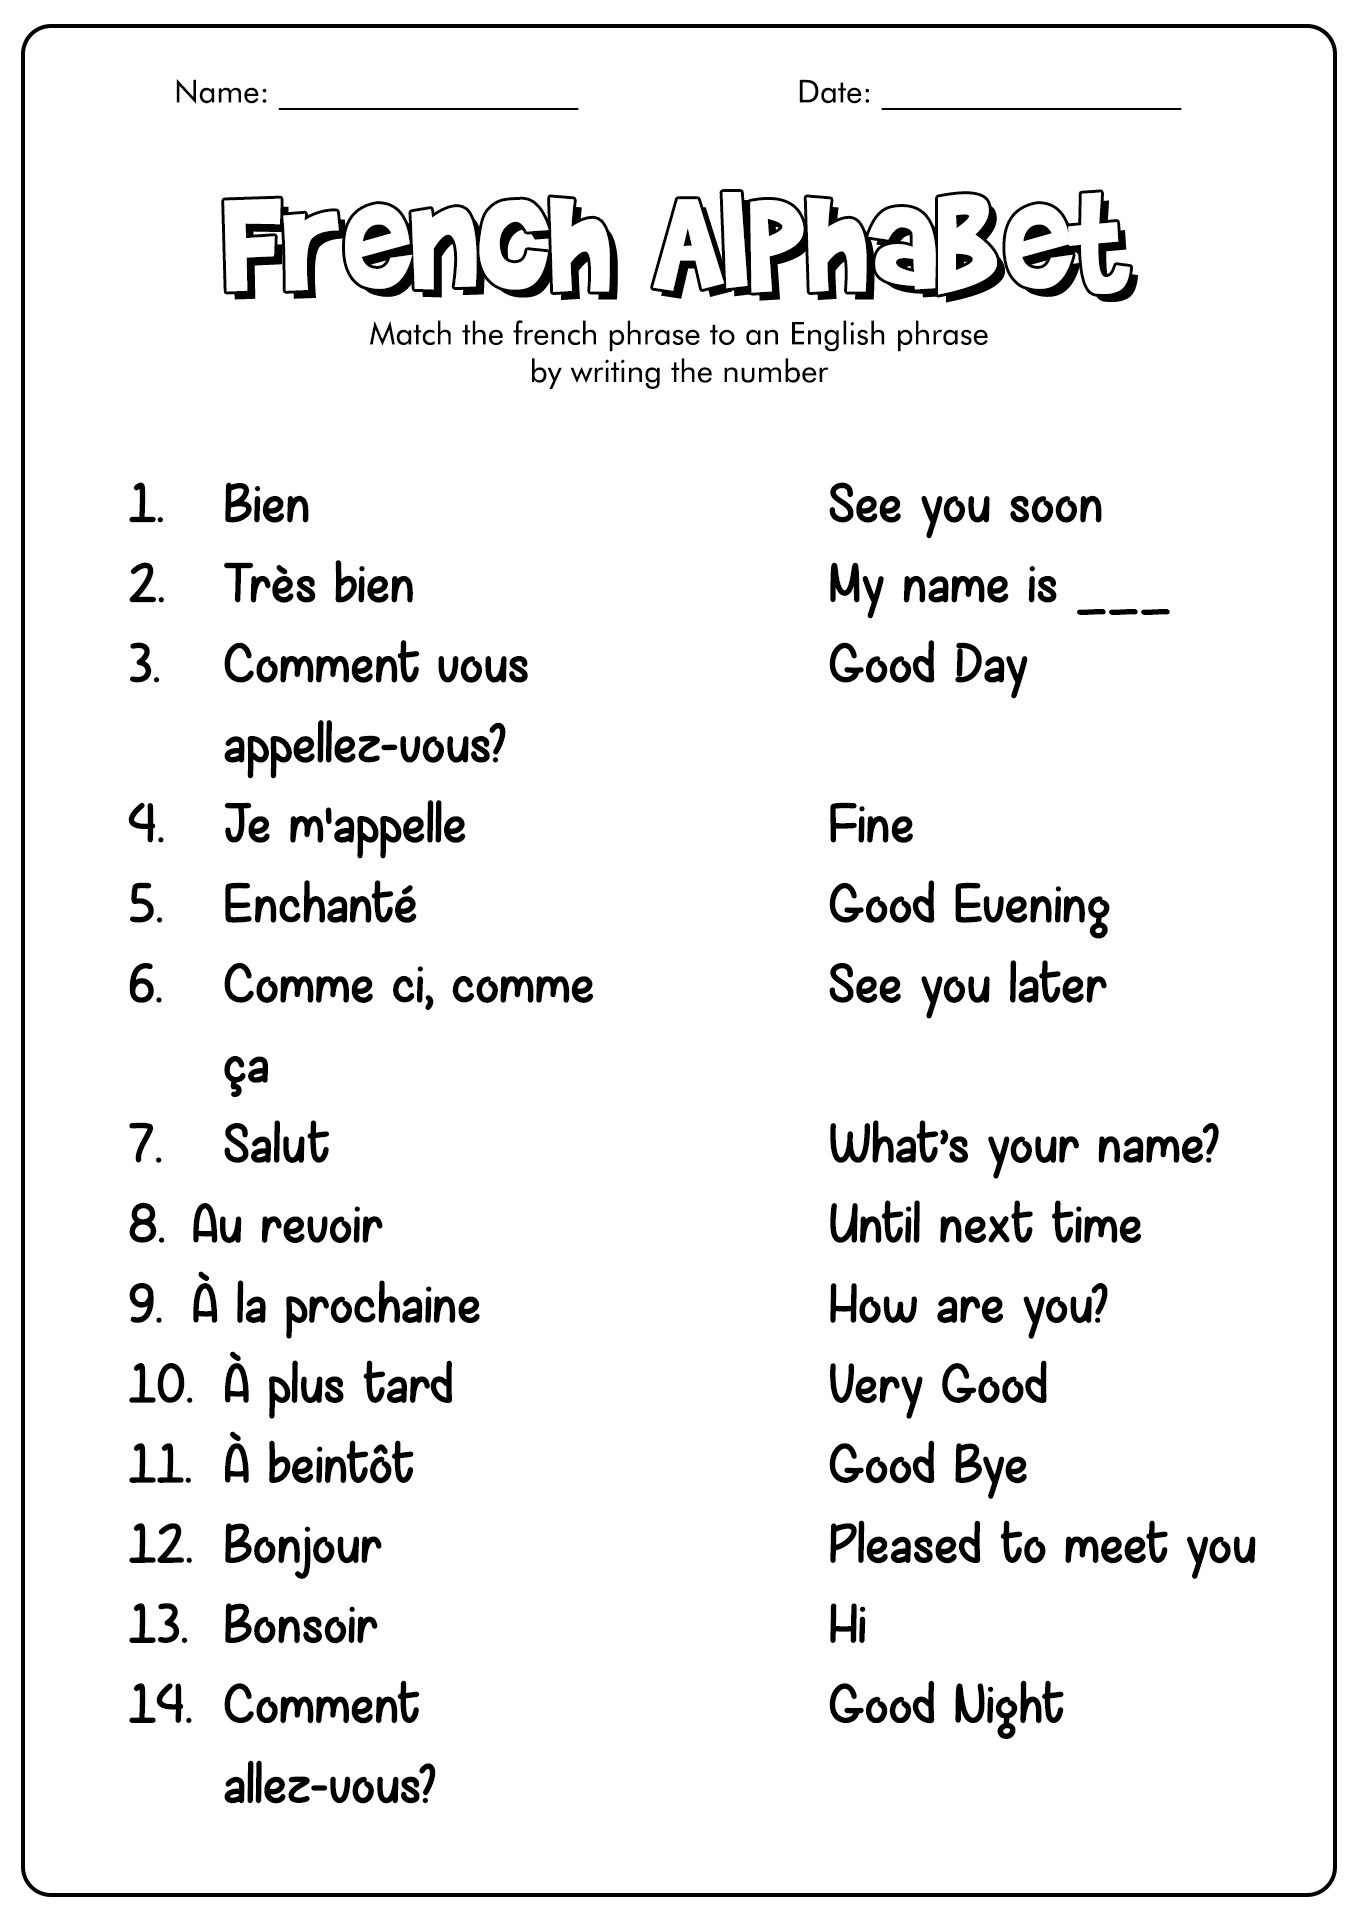 greetings-in-french-printable-materials-for-learning-french-greetings